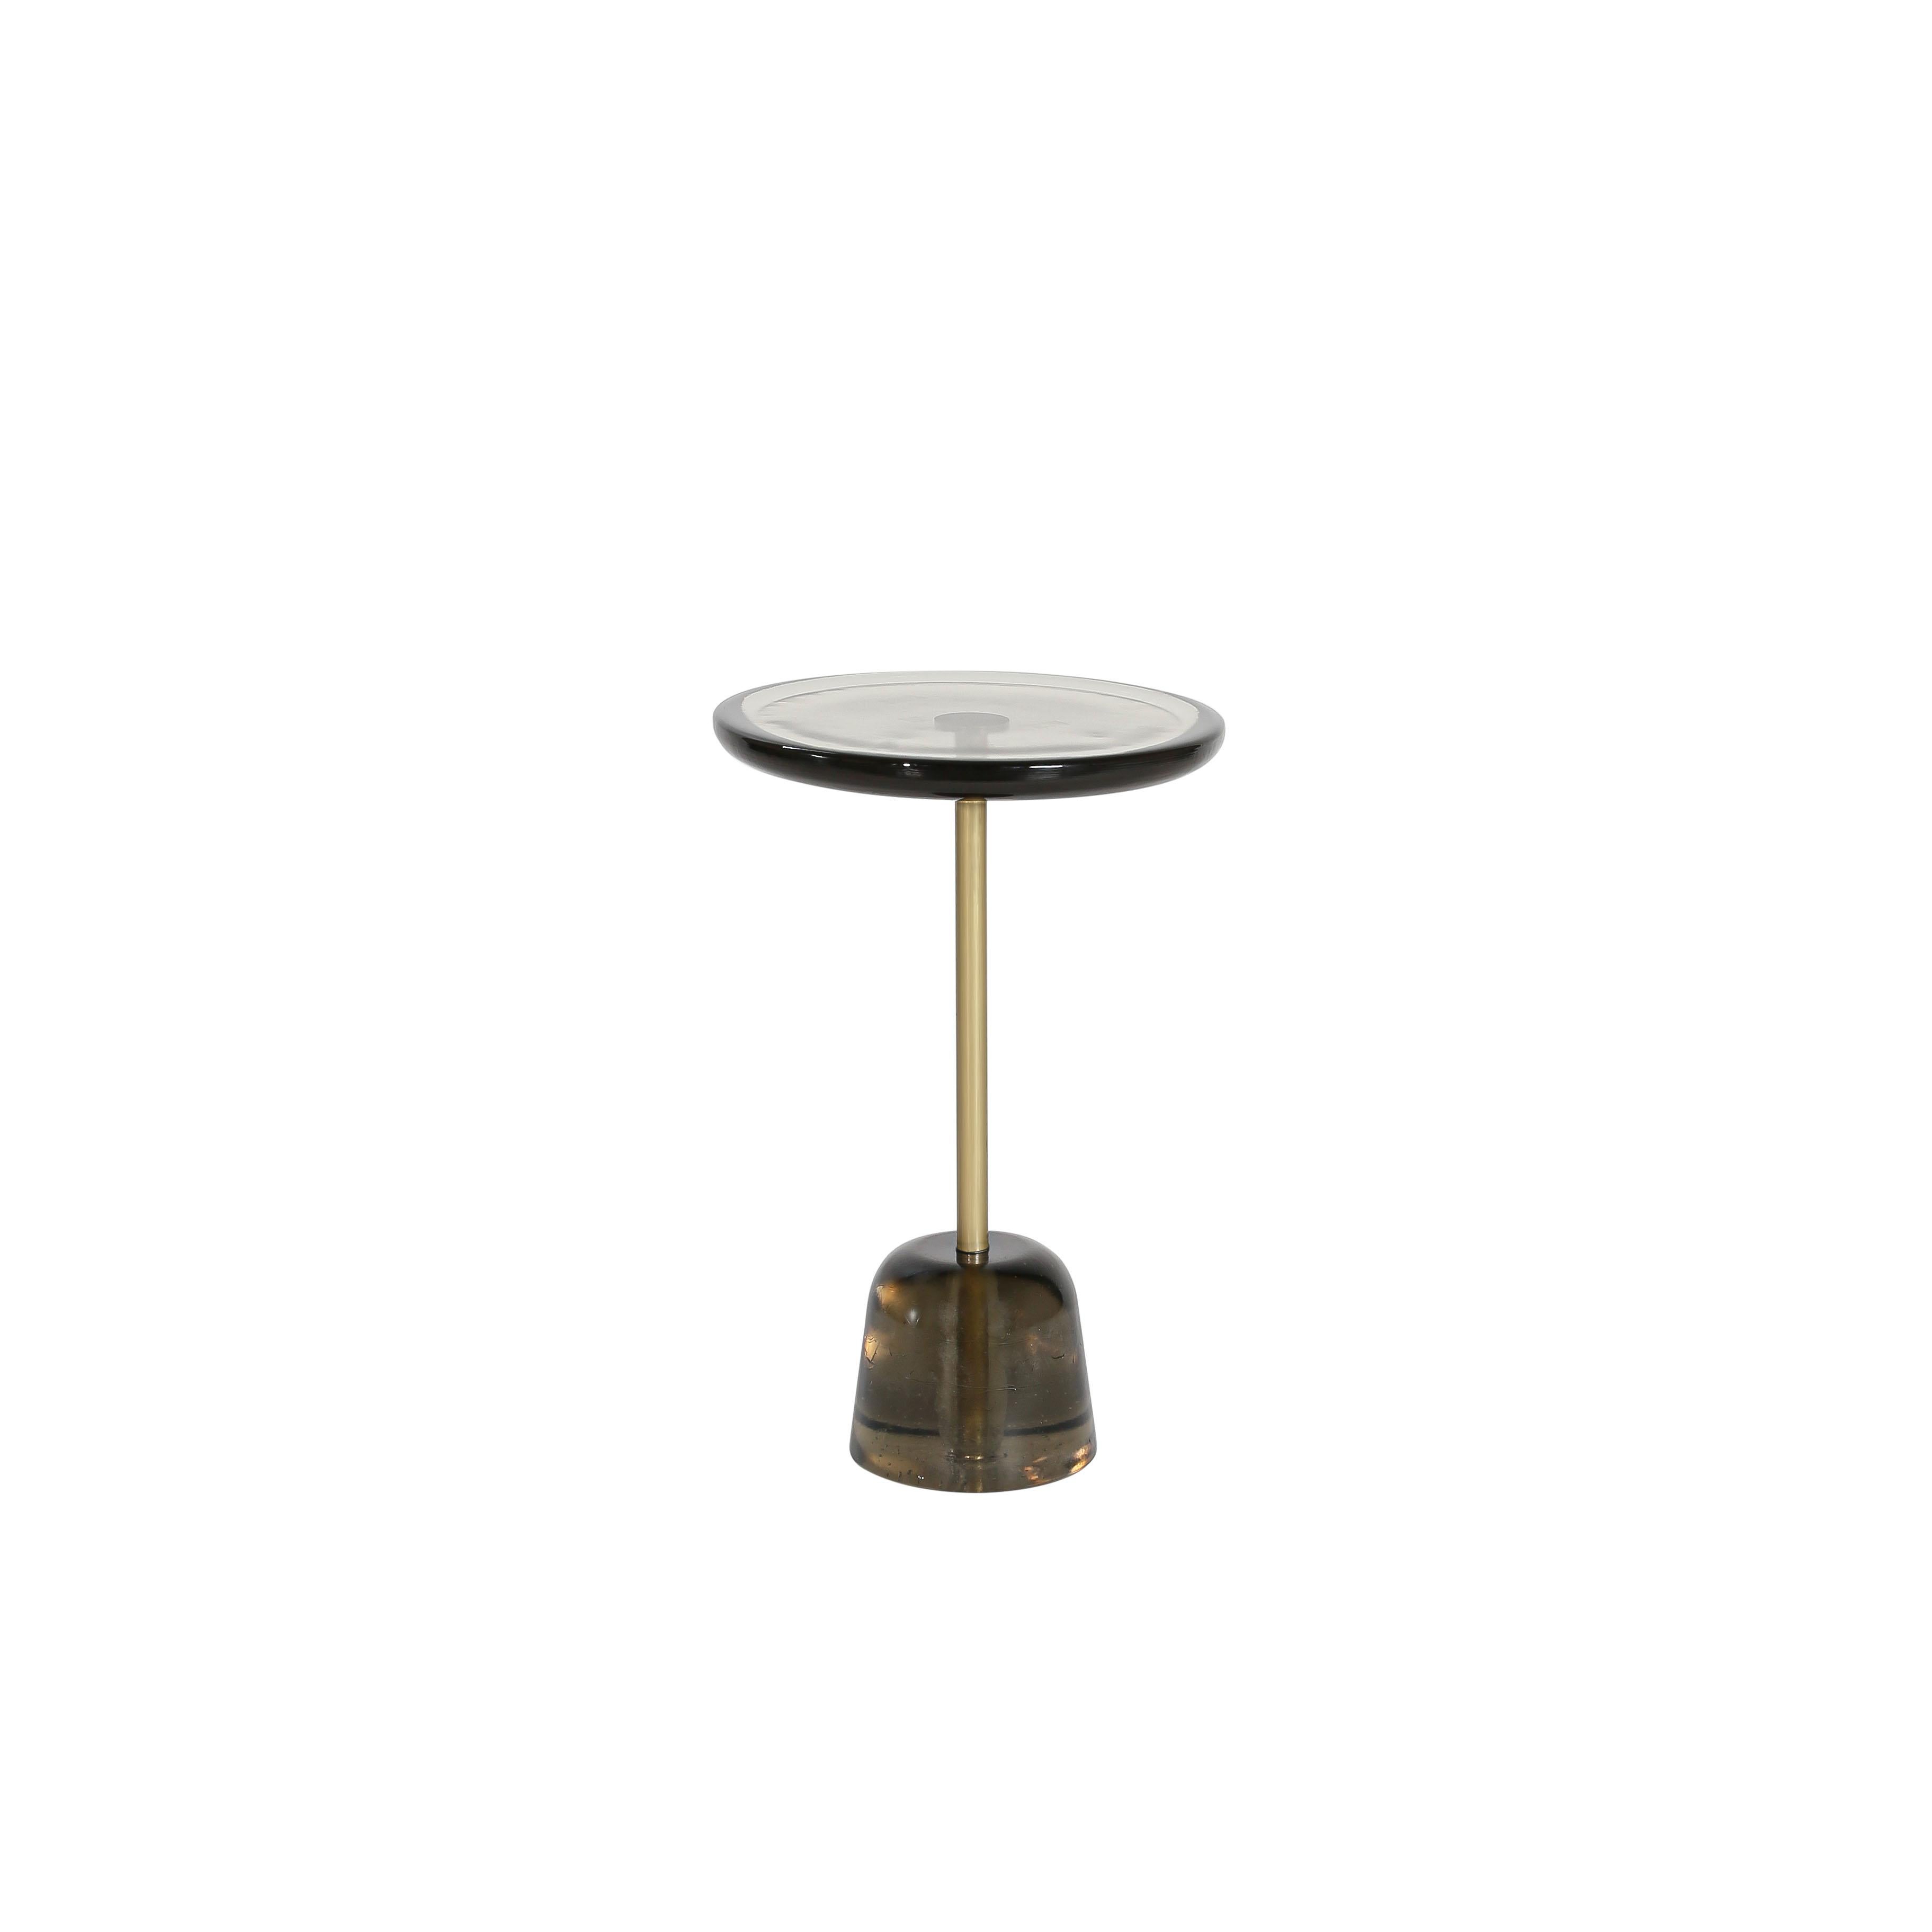 Pina high light grey brass side table by Pulpo
Dimensions: D 34 x H 52 cm
Materials: Glass; brass and steel.

Also available in different colours.

Sebastian Herkner’s distinctively tall, skinny side table series pina is inspired by the abstract